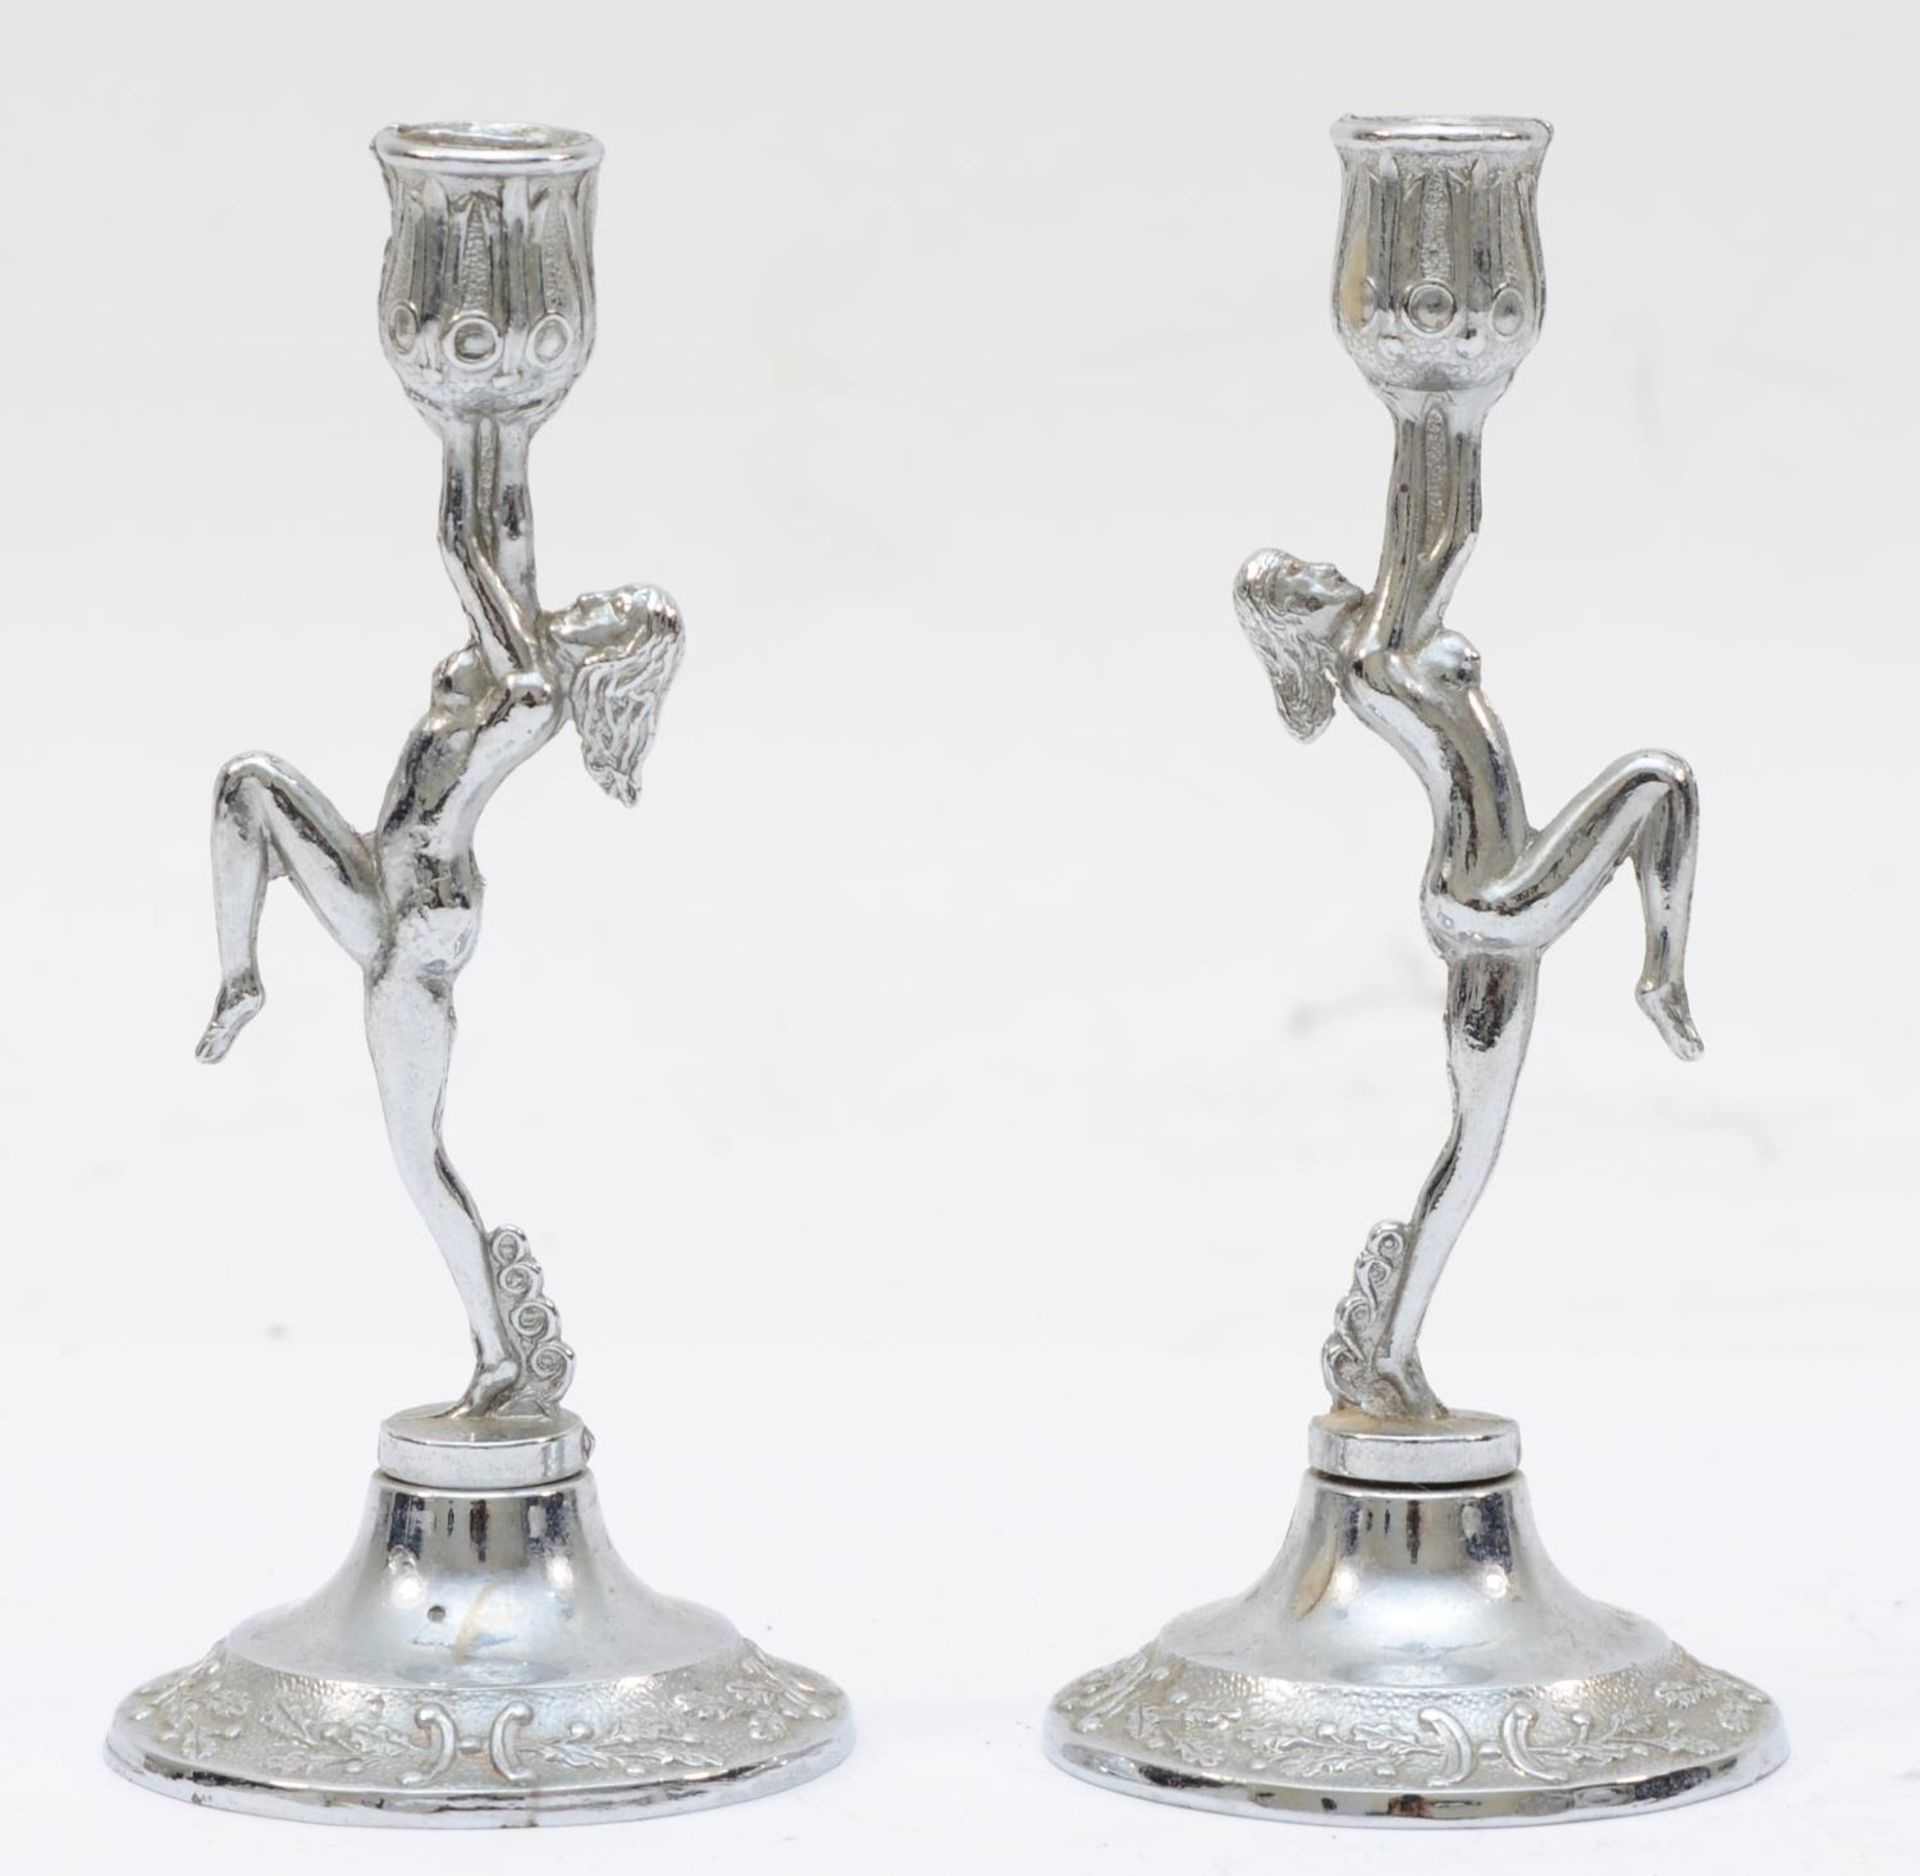 A pair of silver plated candle sticks in the Art Deco style, 11.5 x 5cm. - Image 2 of 3